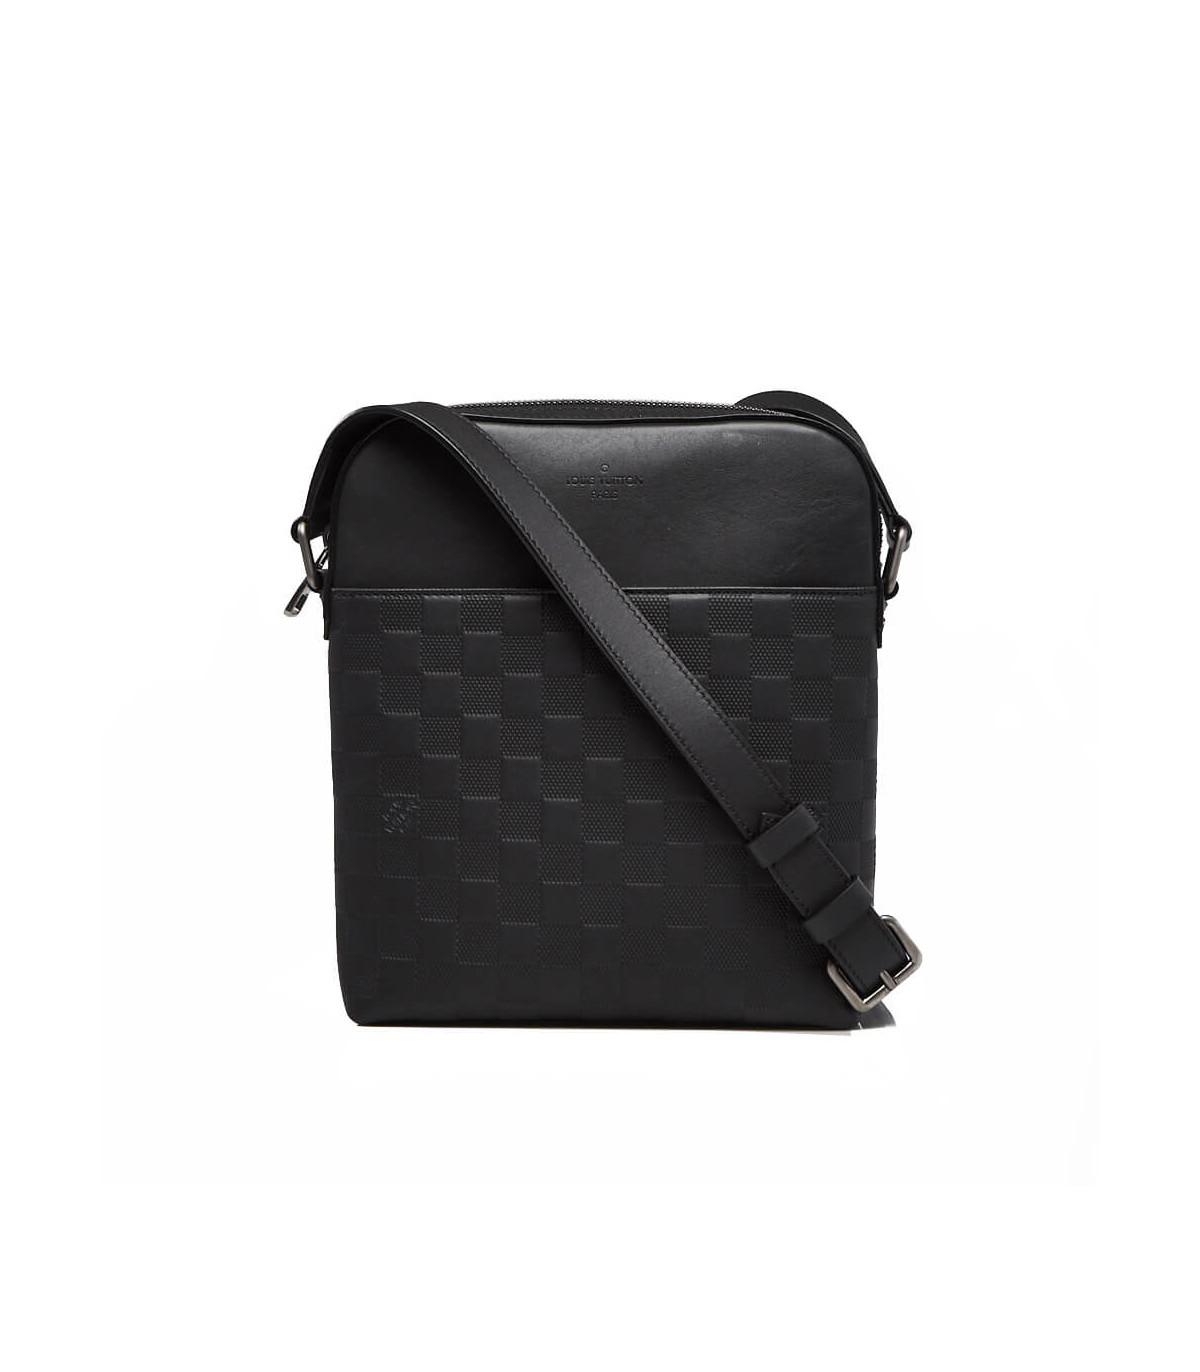 District leather bag Louis Vuitton Black in Leather - 36139365